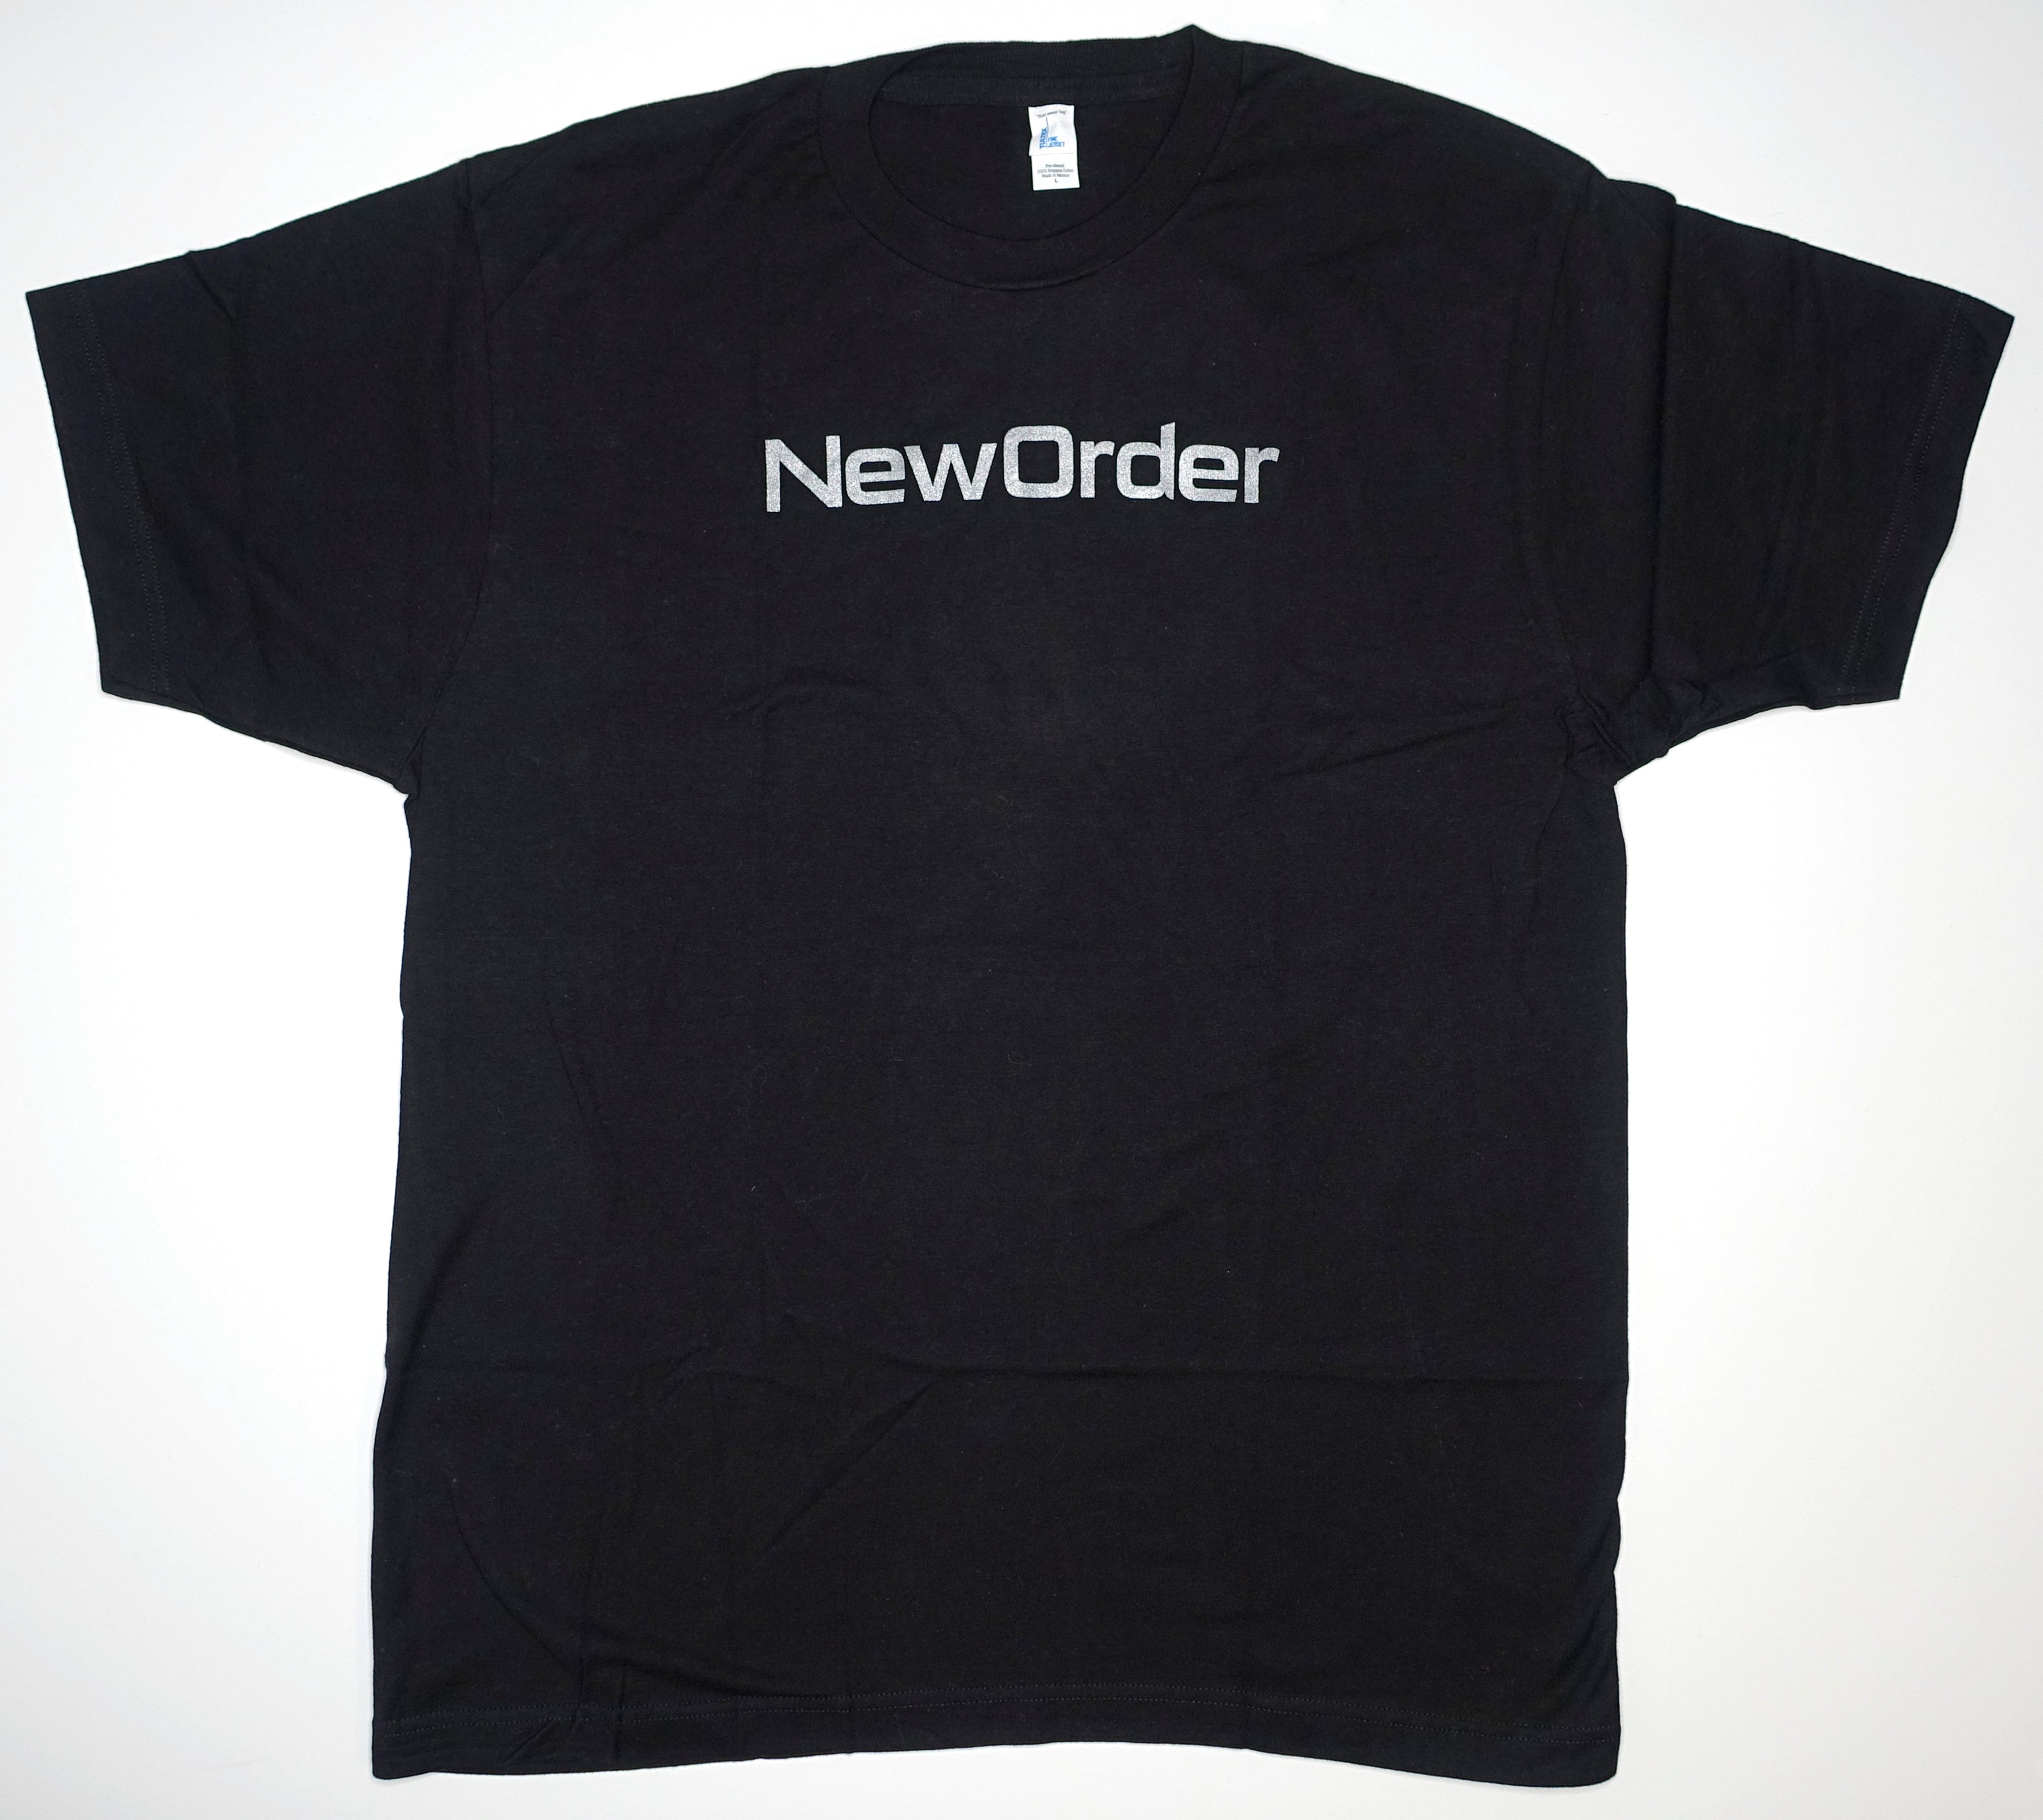 New Order - North American 2012 Tour Shirt Size Large